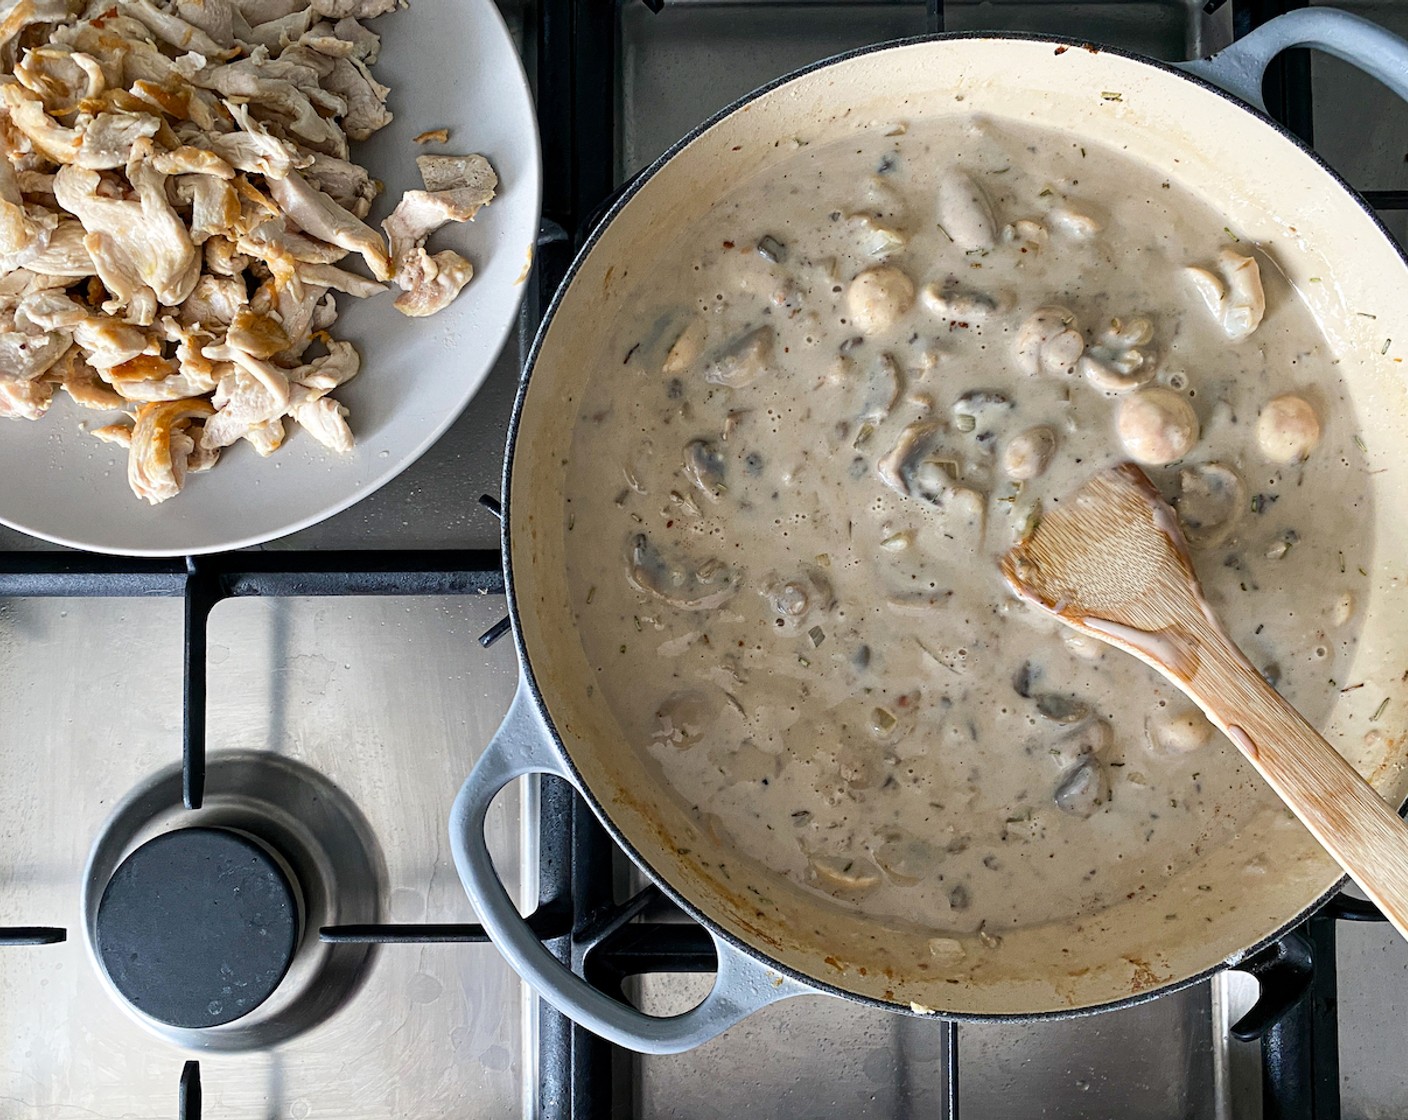 step 5 Stir in the All-Purpose Flour (1/4 cup) and add the Cream of Mushroom Soup (1 can), Chicken Broth (1 cup), and Milk (1 1/2 cups) and mix until well combined and starts to bubble. Taste and season with salt and pepper, if needed.